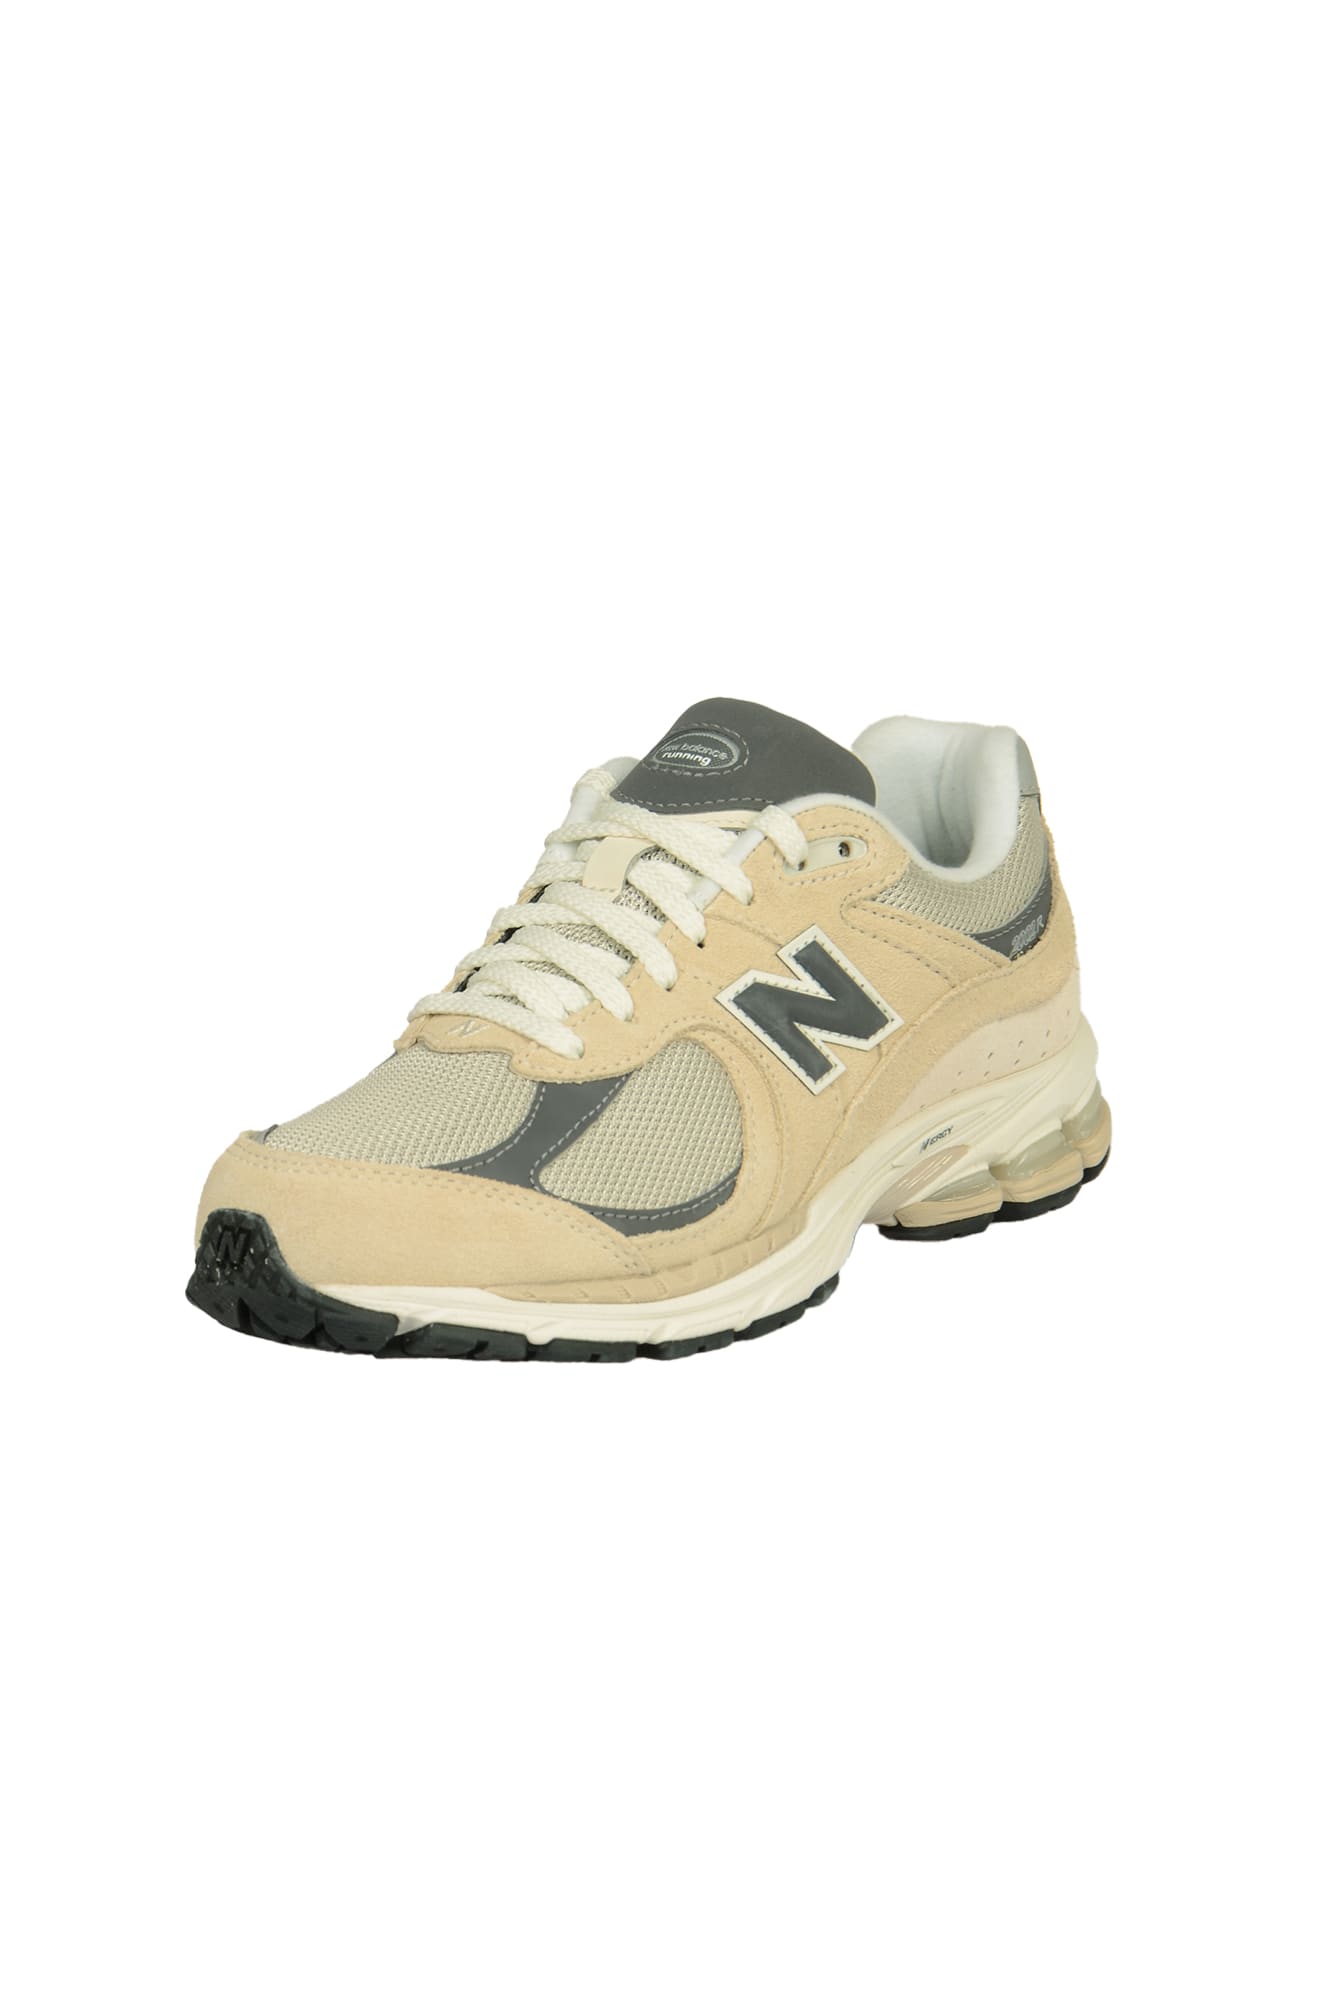 Shop New Balance 2002 Sneakers